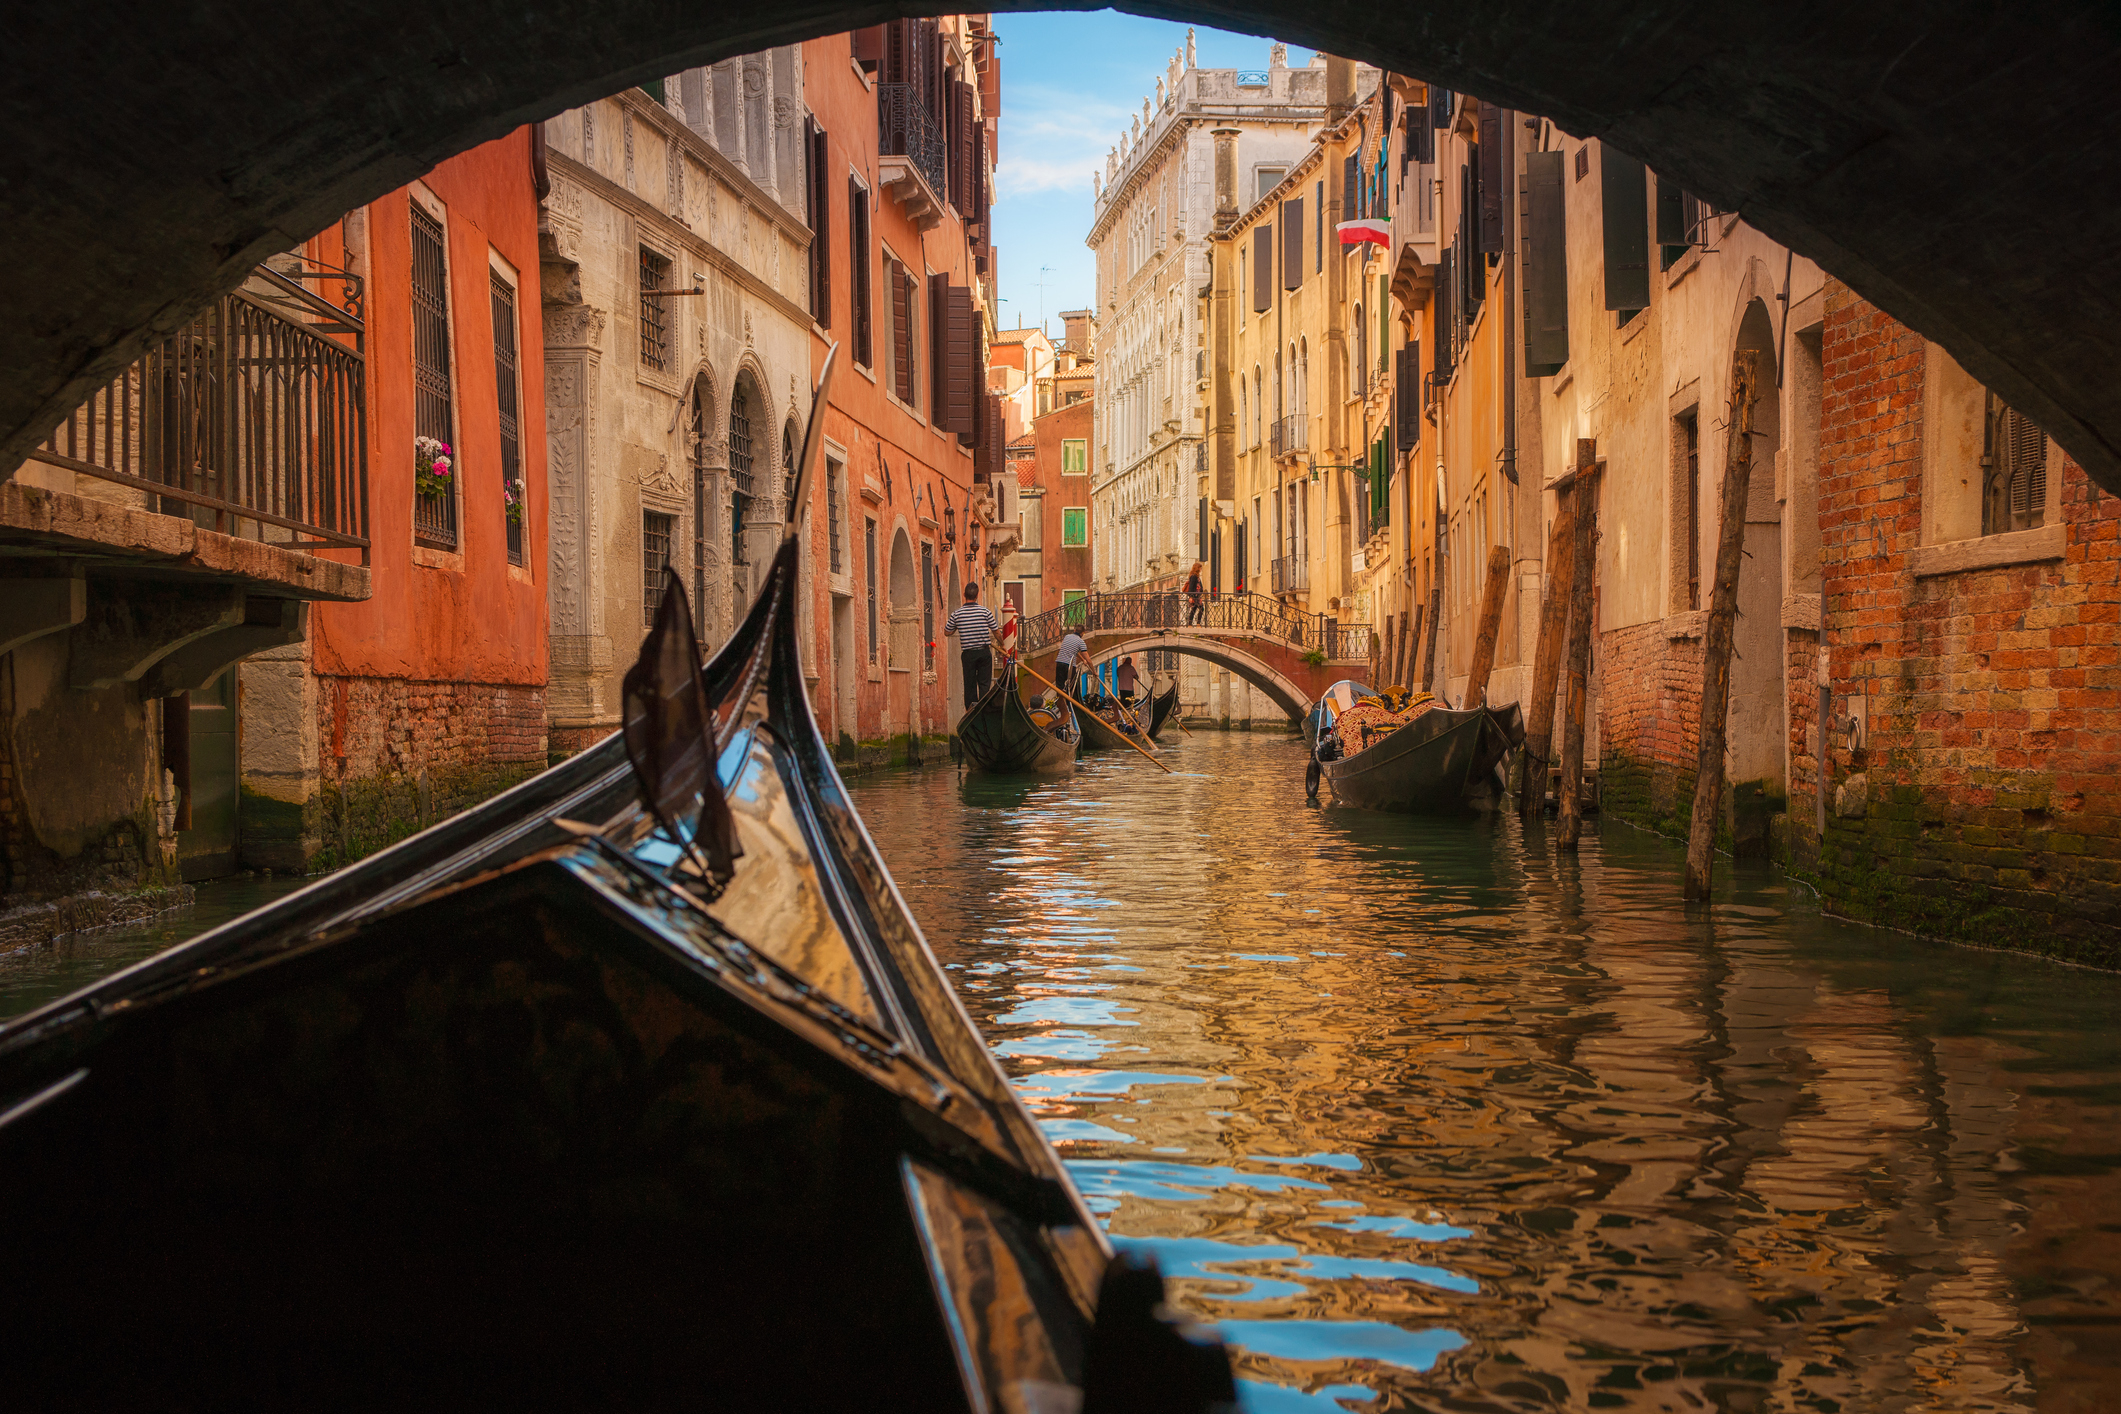 View from a gondola on a narrow Venetian canal with bridges and ancient buildings